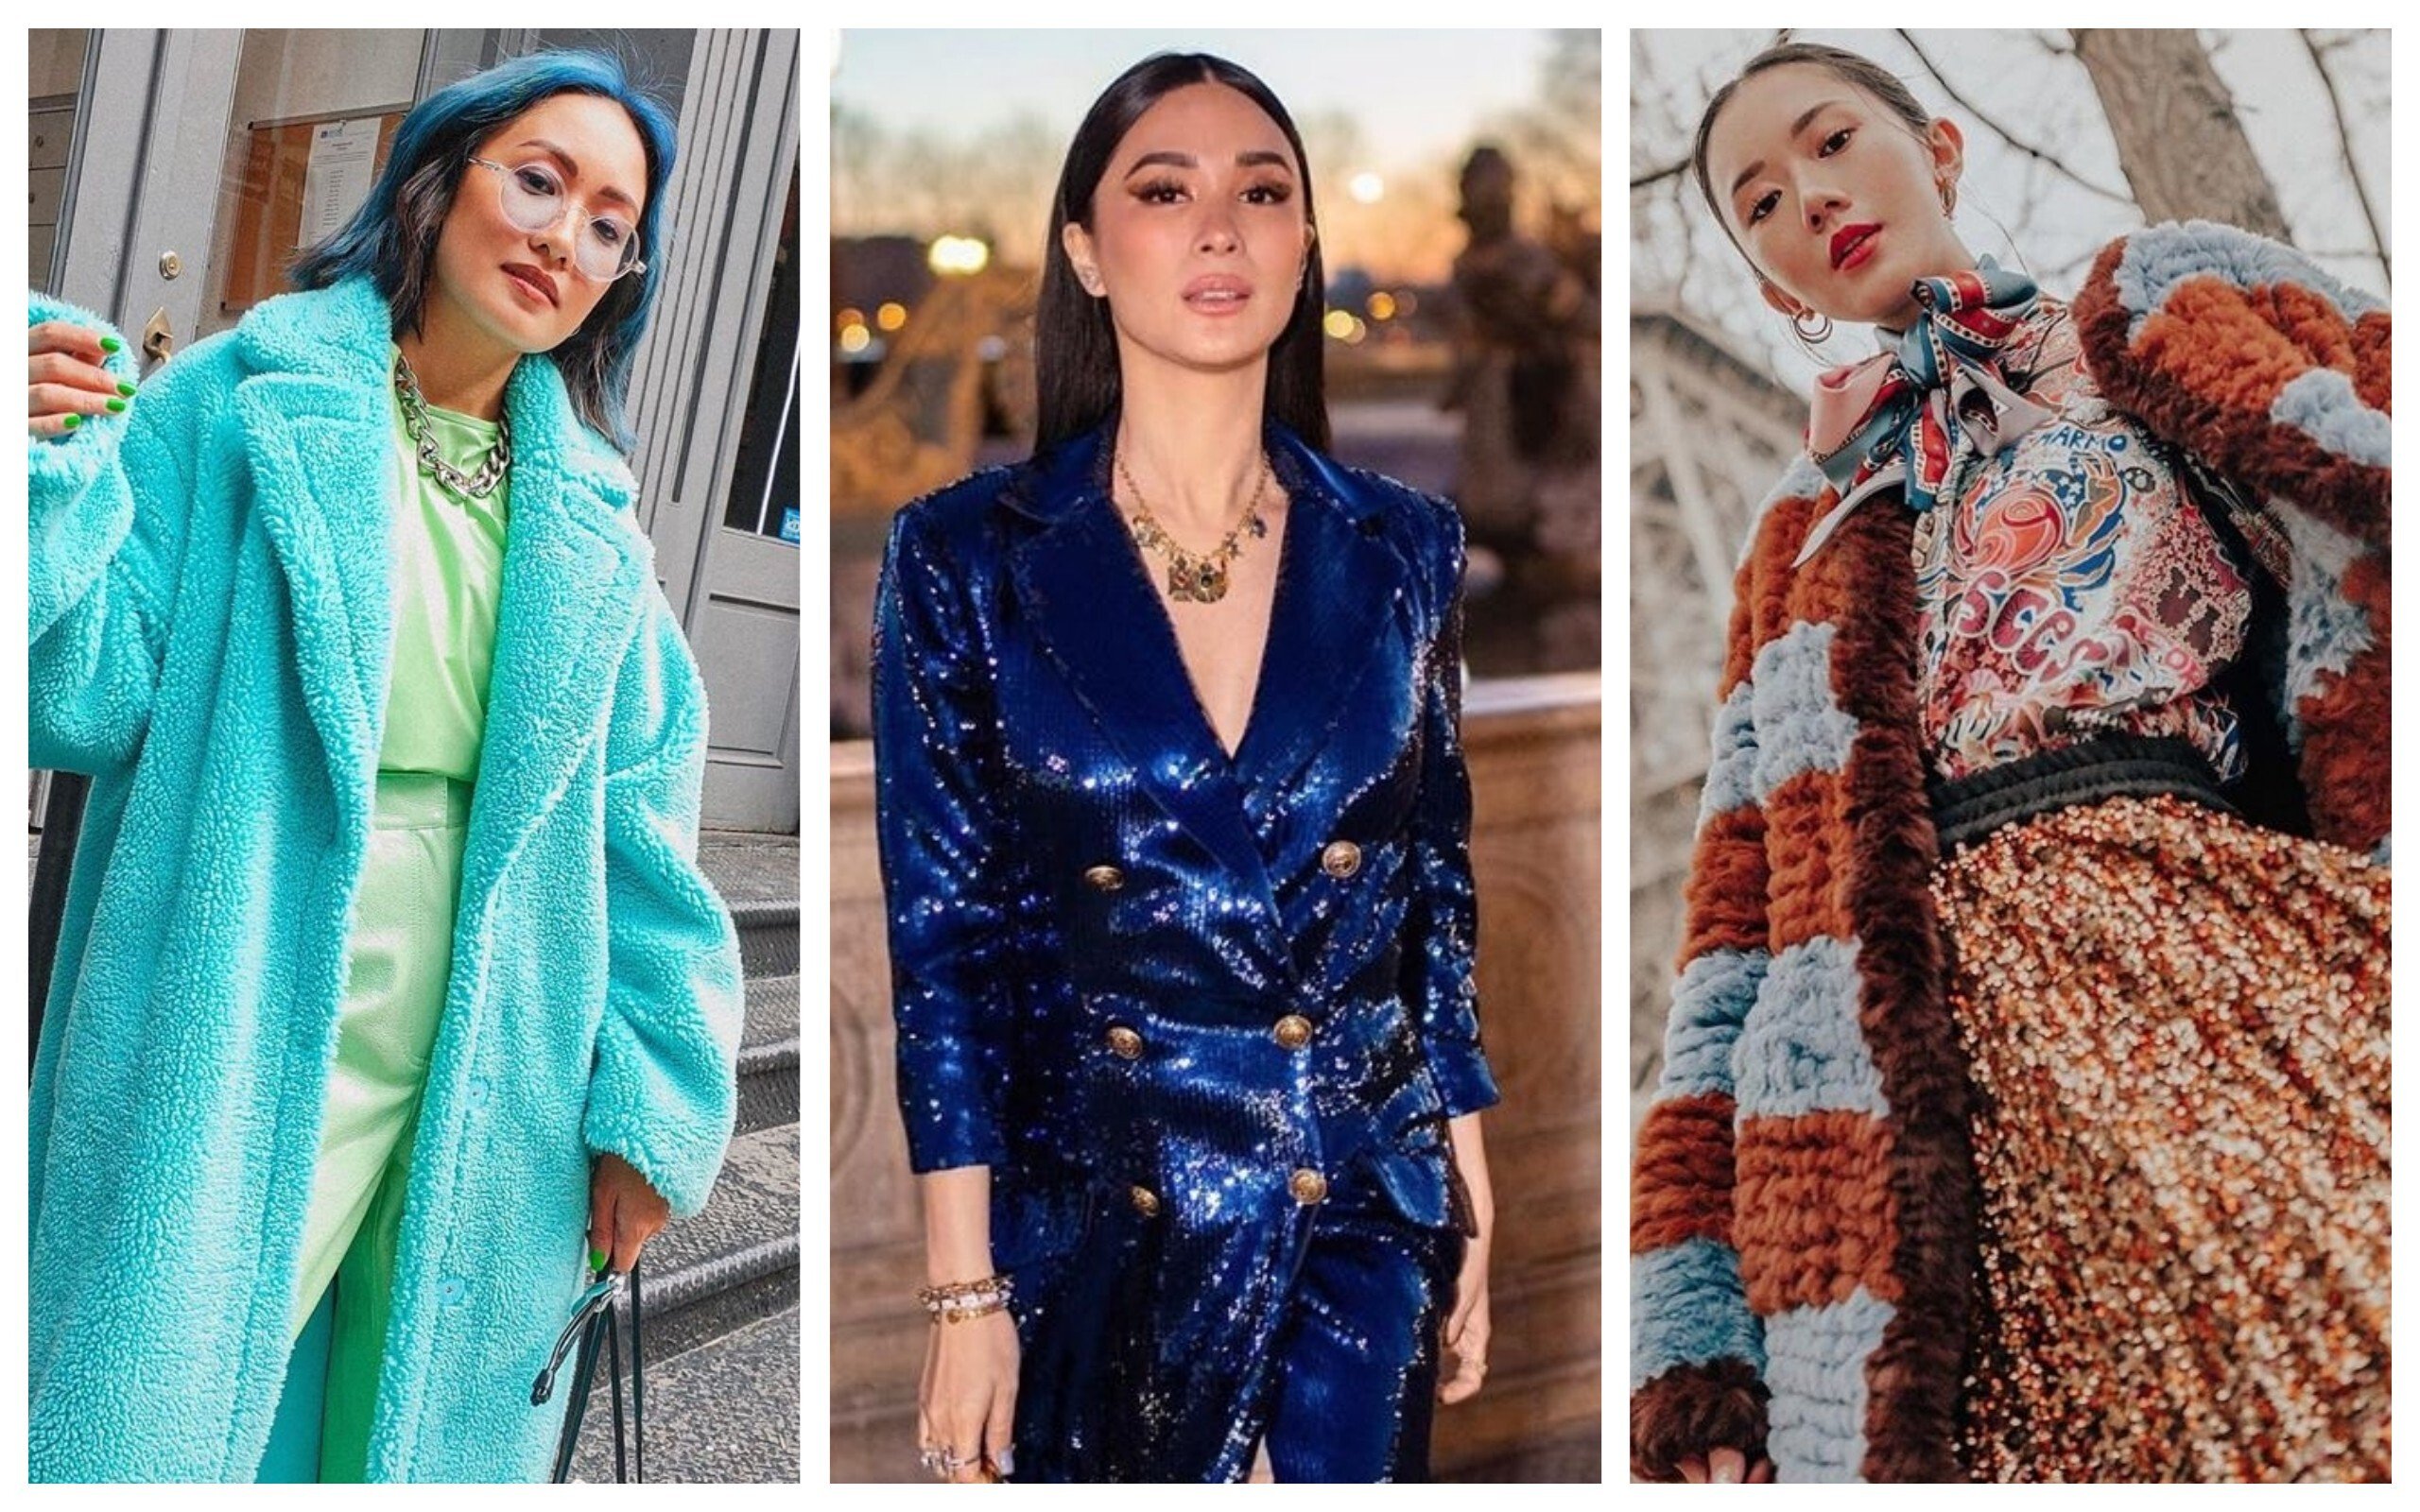 Heart Evangelista email and Instagram Influencer profile - @iamhearte  followers and engagement